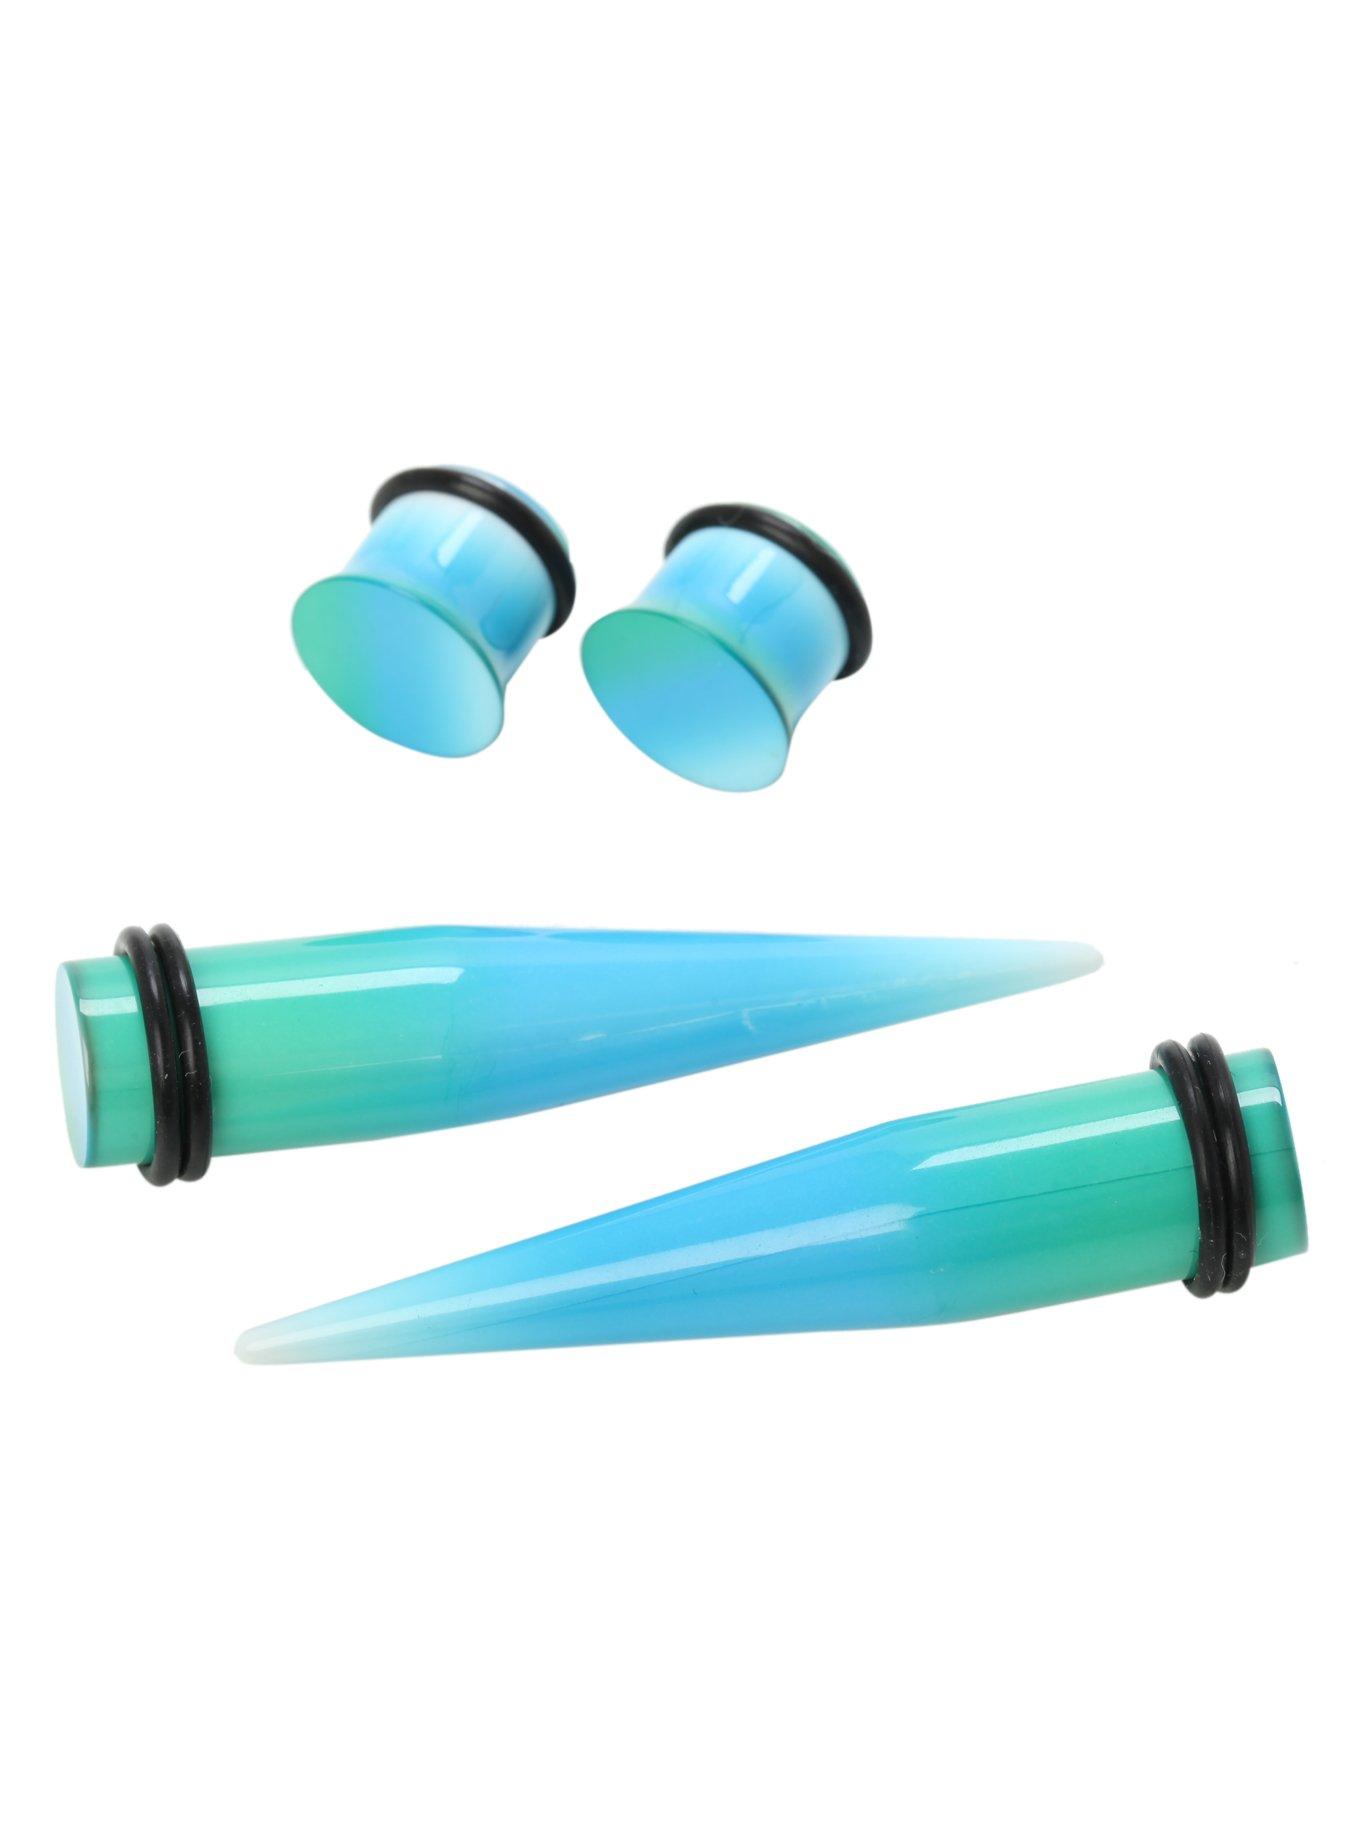 Acrylic Green Blue White Ombre Taper And Plug 4 Pack, MULTI, hi-res